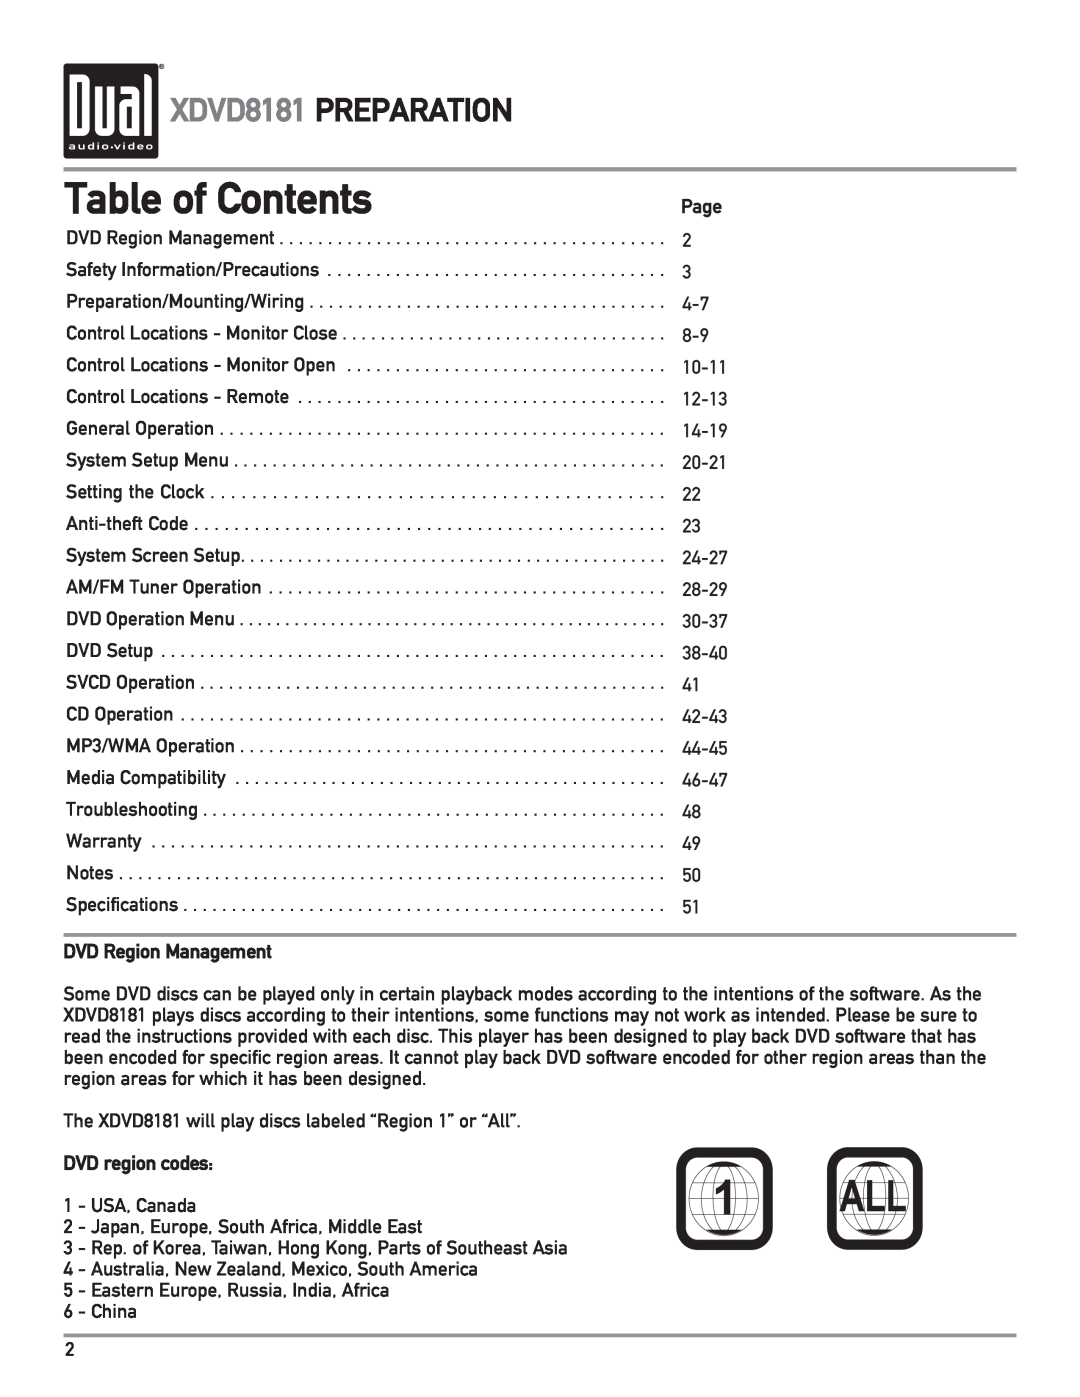 Dual owner manual Table of Contents, XDVD8181 PREPARATION, Page, DVD Region Management, DVD region codes 